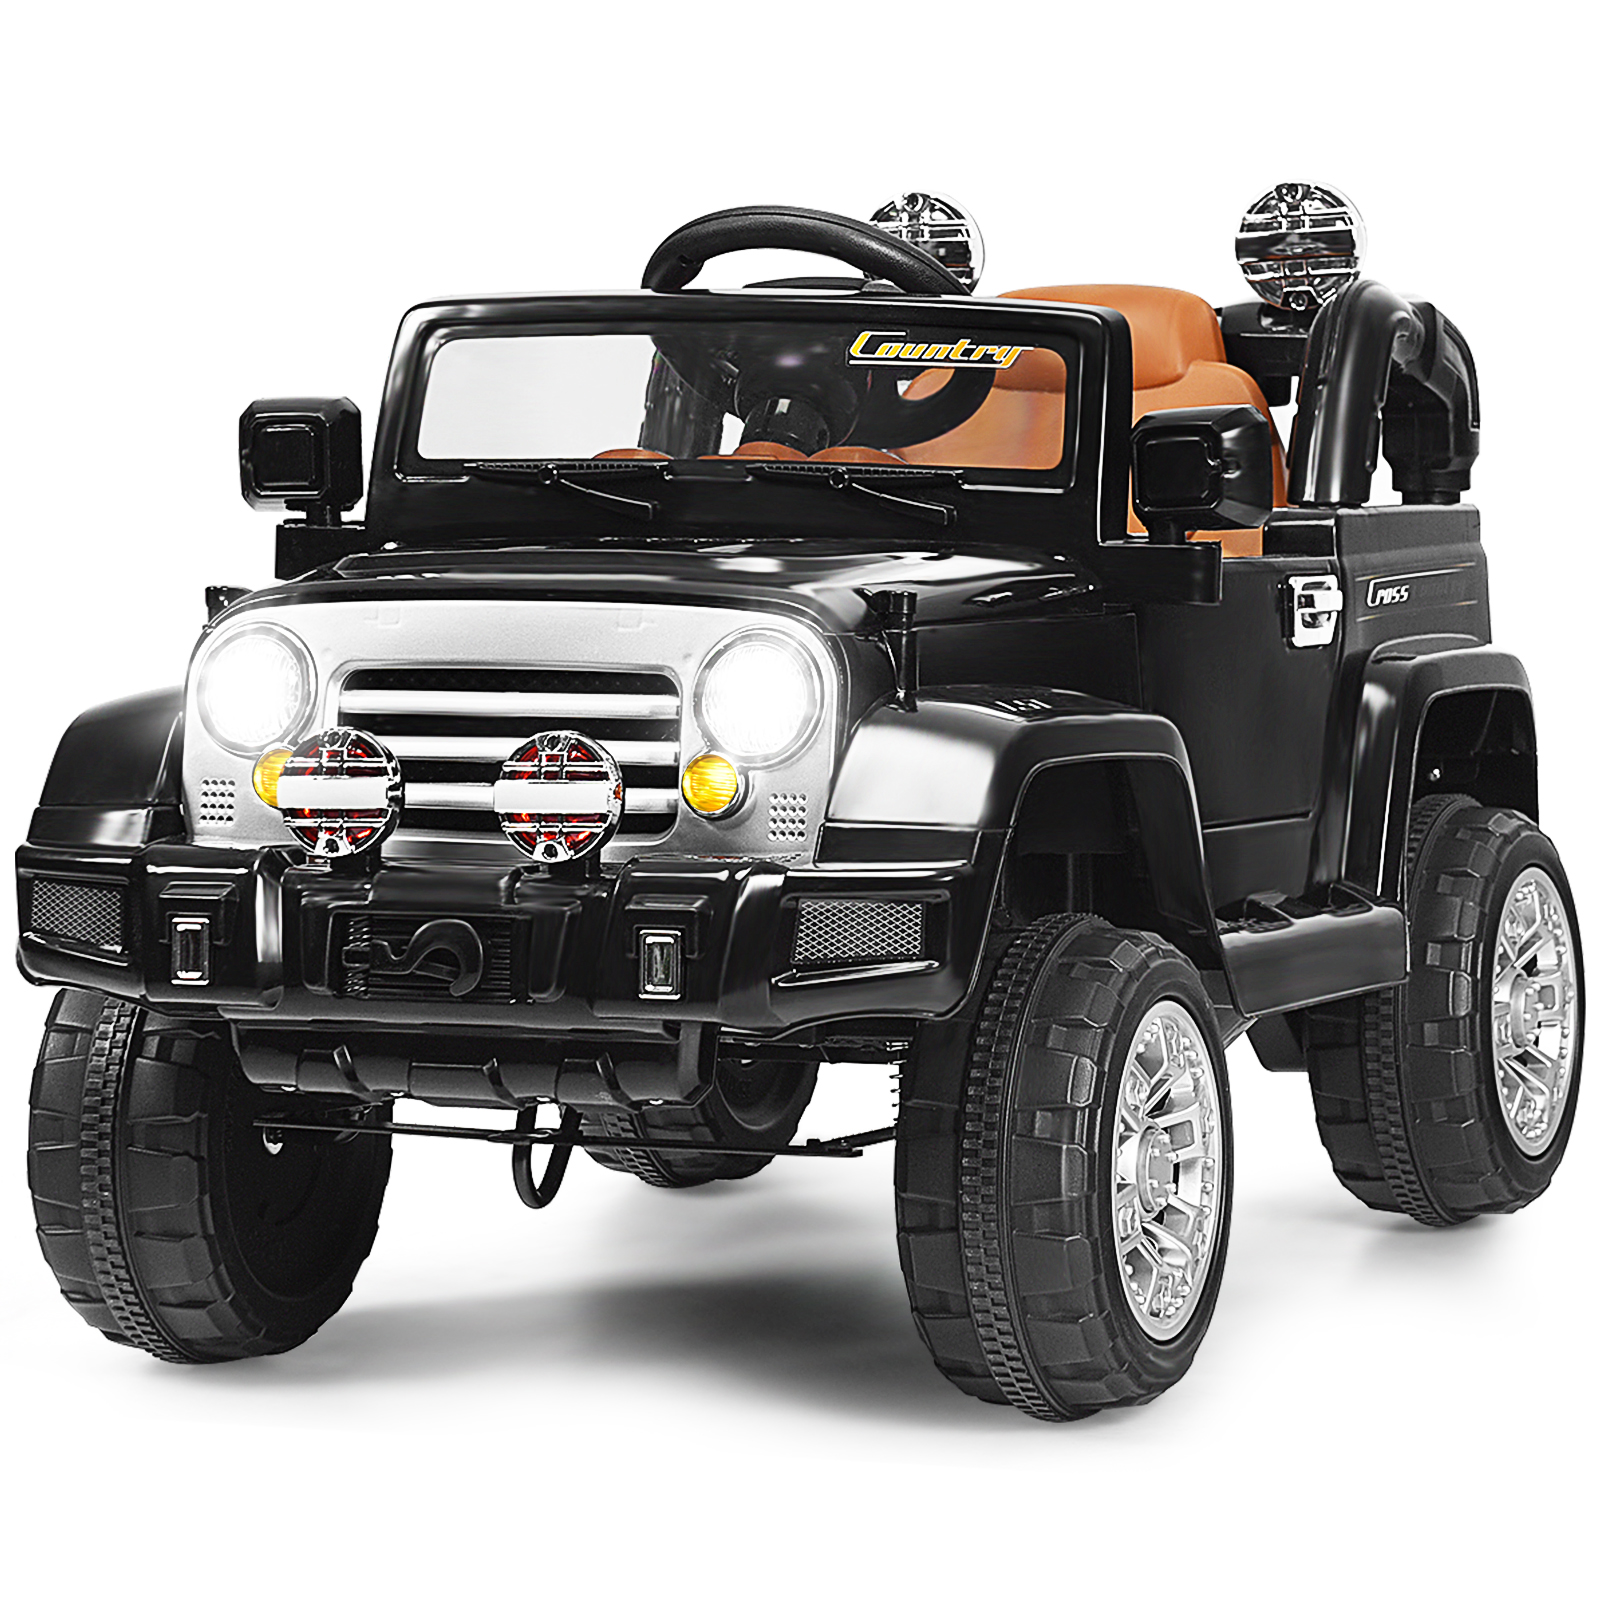 Kids Ride on Jeep Car Battery Powered with Remote Control-Black